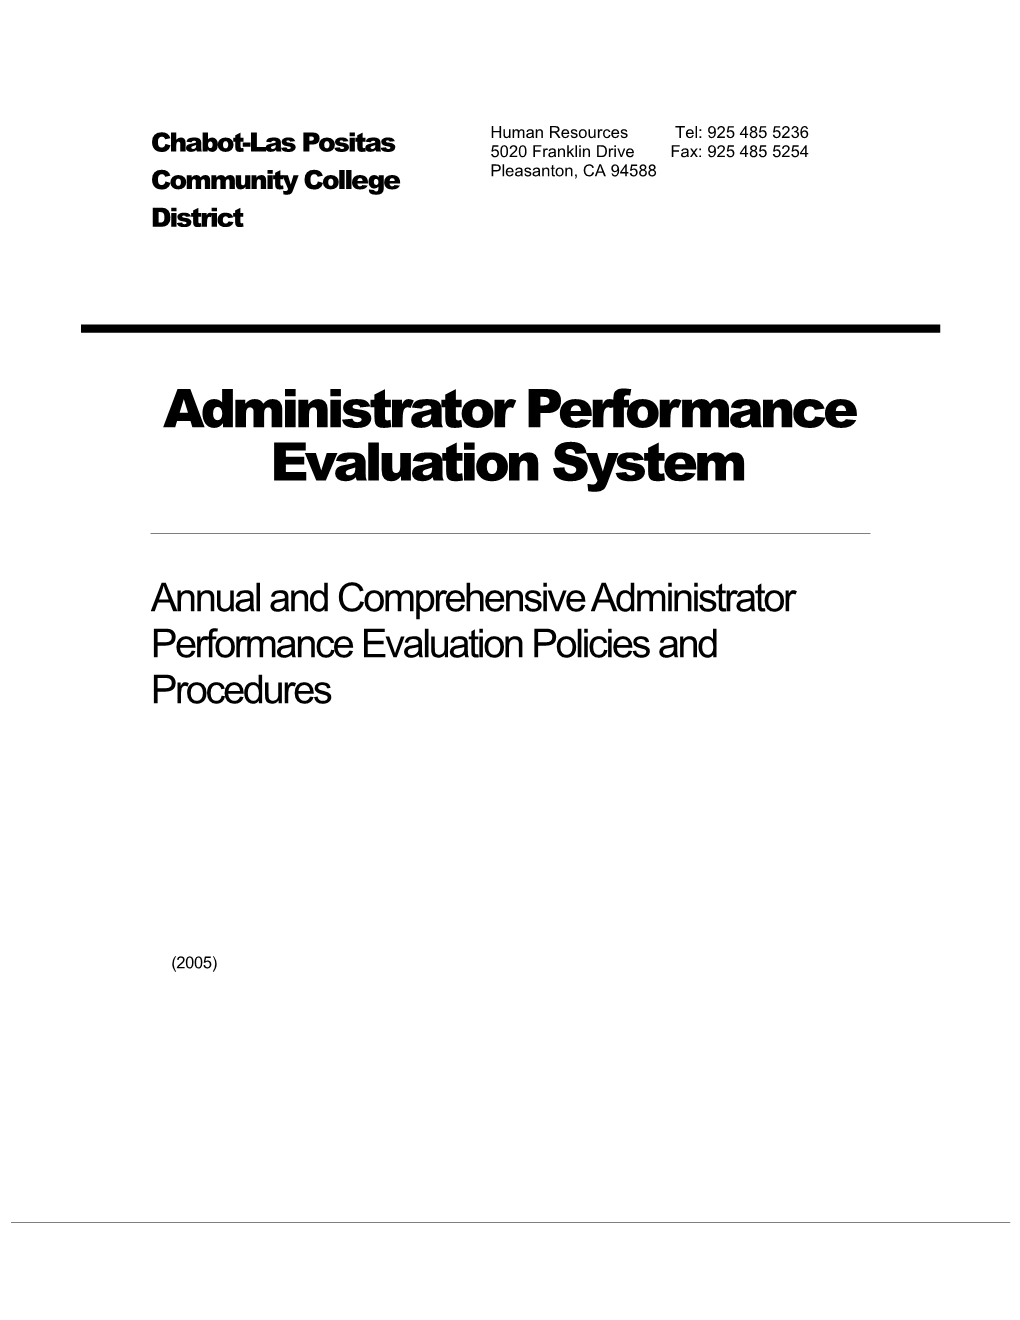 Administrator Performance Evaluation System